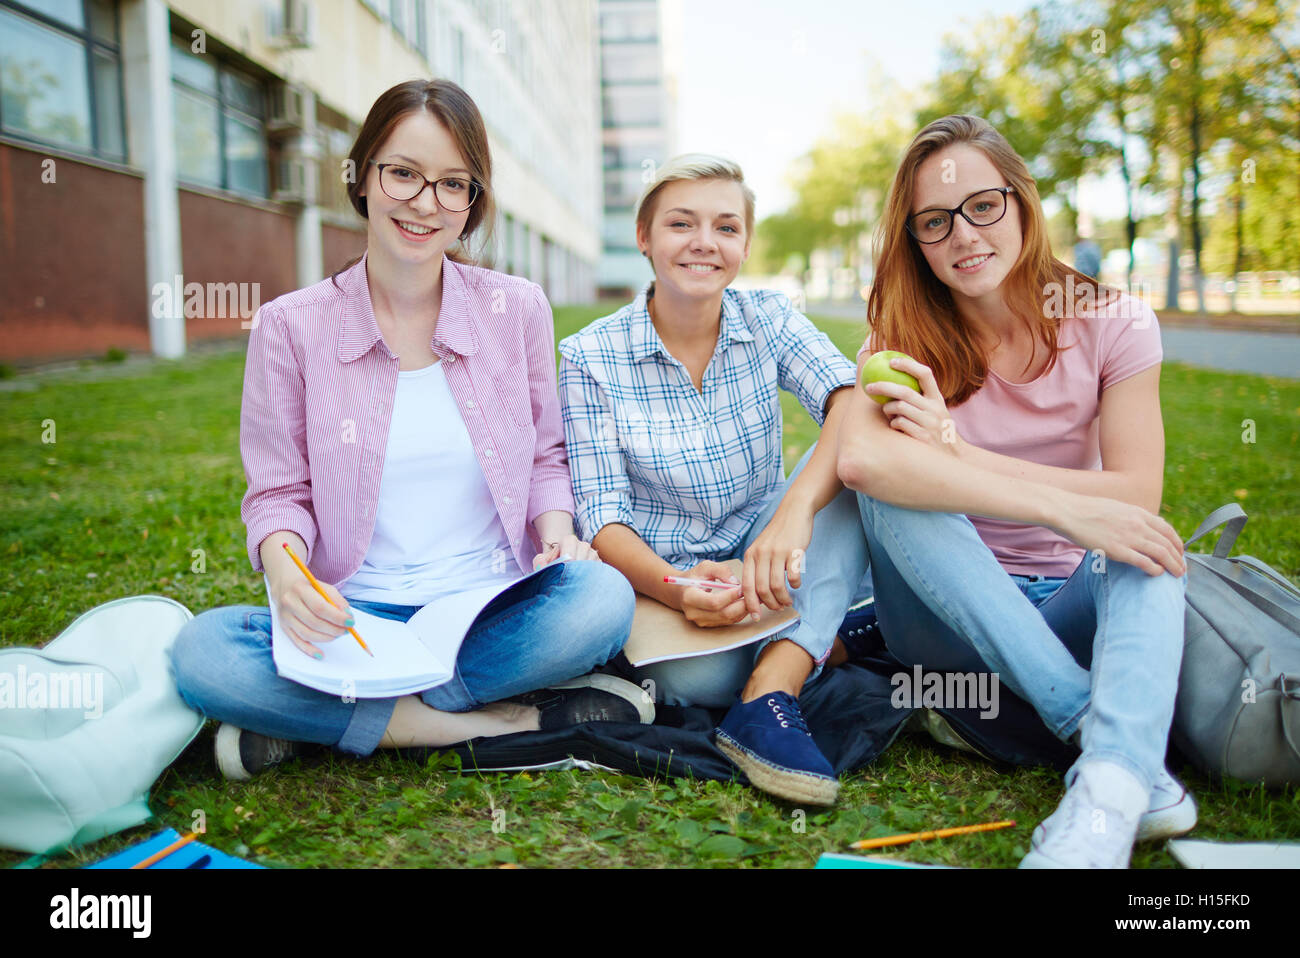 Clever students Stock Photo